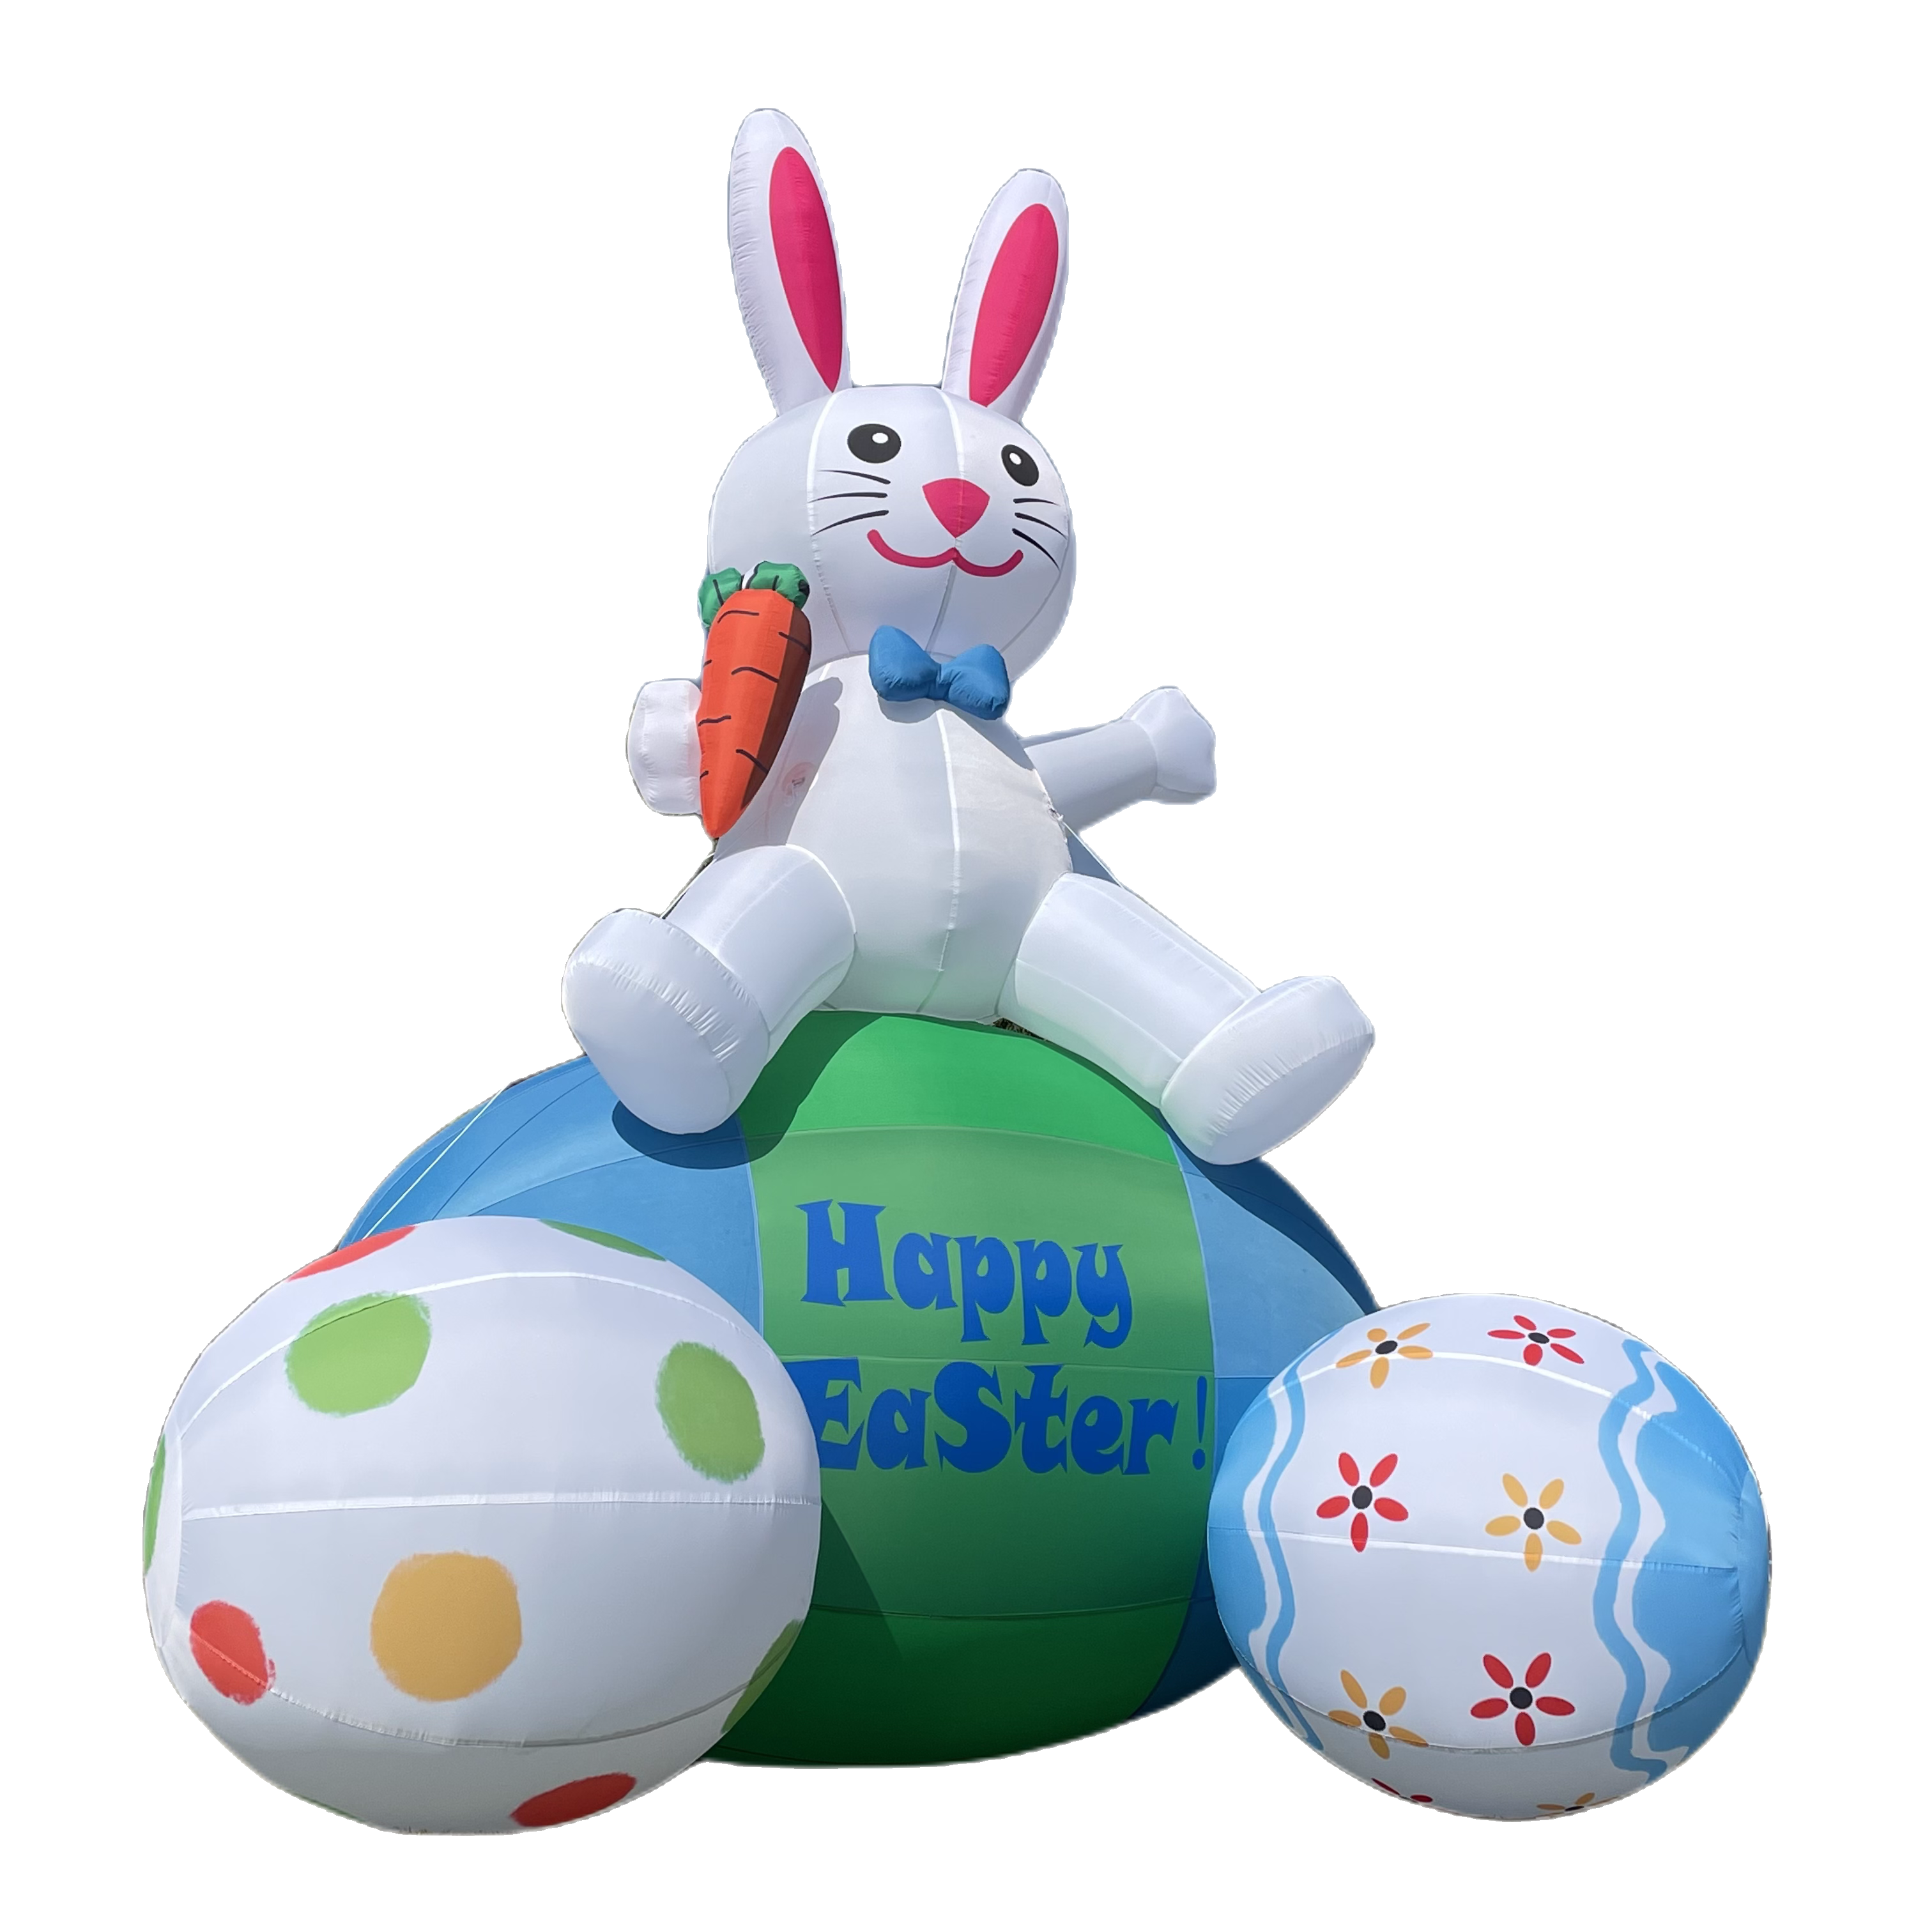 Gaint 20FT Easter Bunny,Easter Inflatables Outdoor Decorations,Blow up Outdoor Commercial Decoration with Blower,Suitable for Courtyard, Garden, Lawn